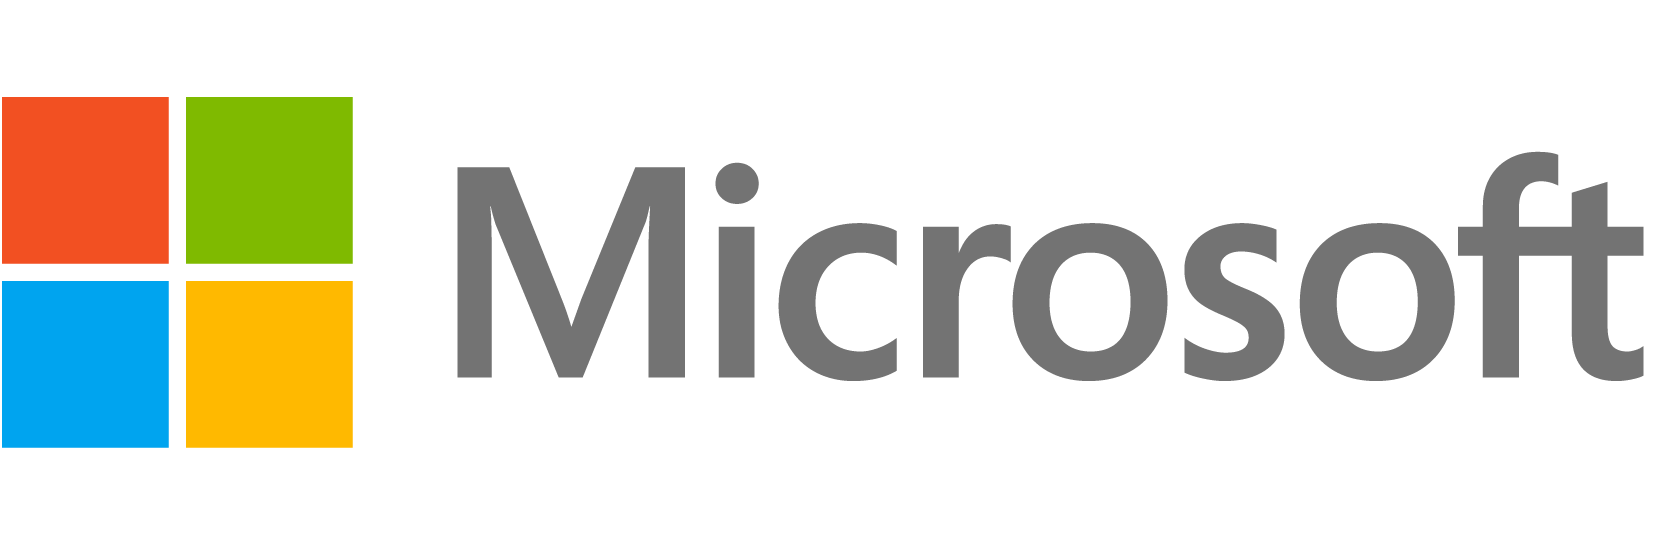 Current Microsoft Logo - Microsoft Logo, Microsoft Symbol, Meaning, History and Evolution